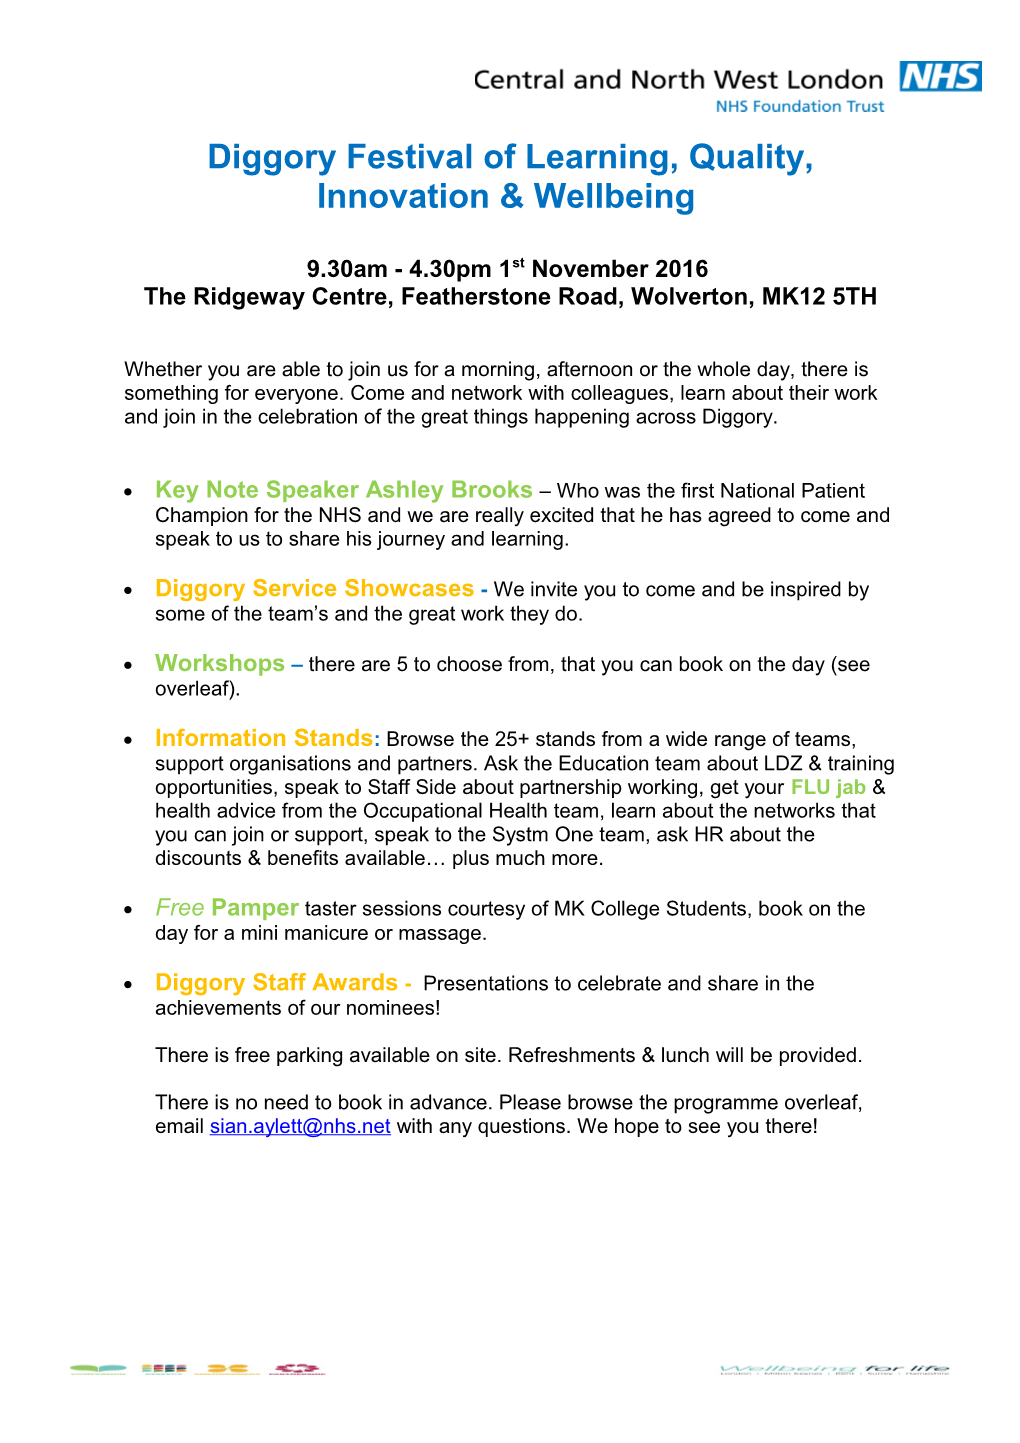 Diggory Festival of Learning, Quality, Innovation &Wellbeing